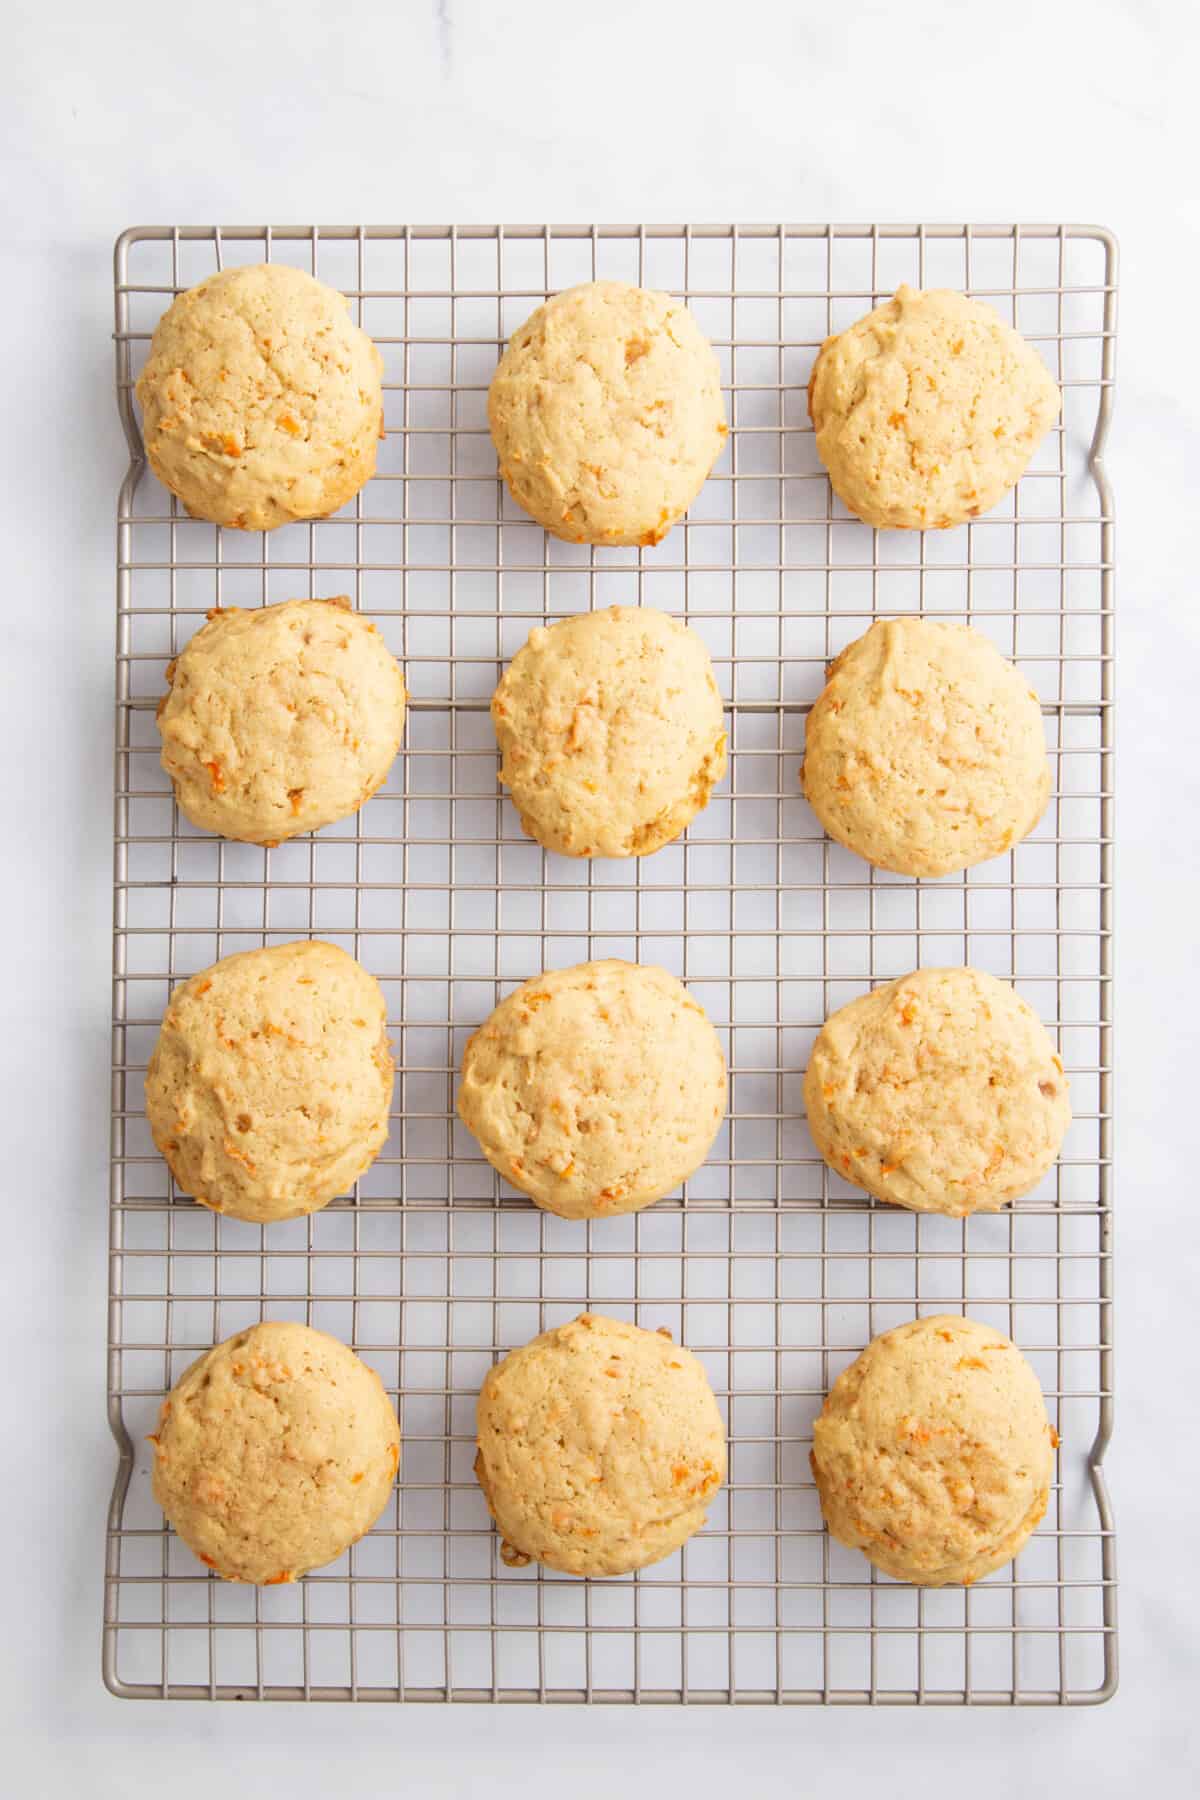 12 carrot cake cookies cooling on a wire rack.